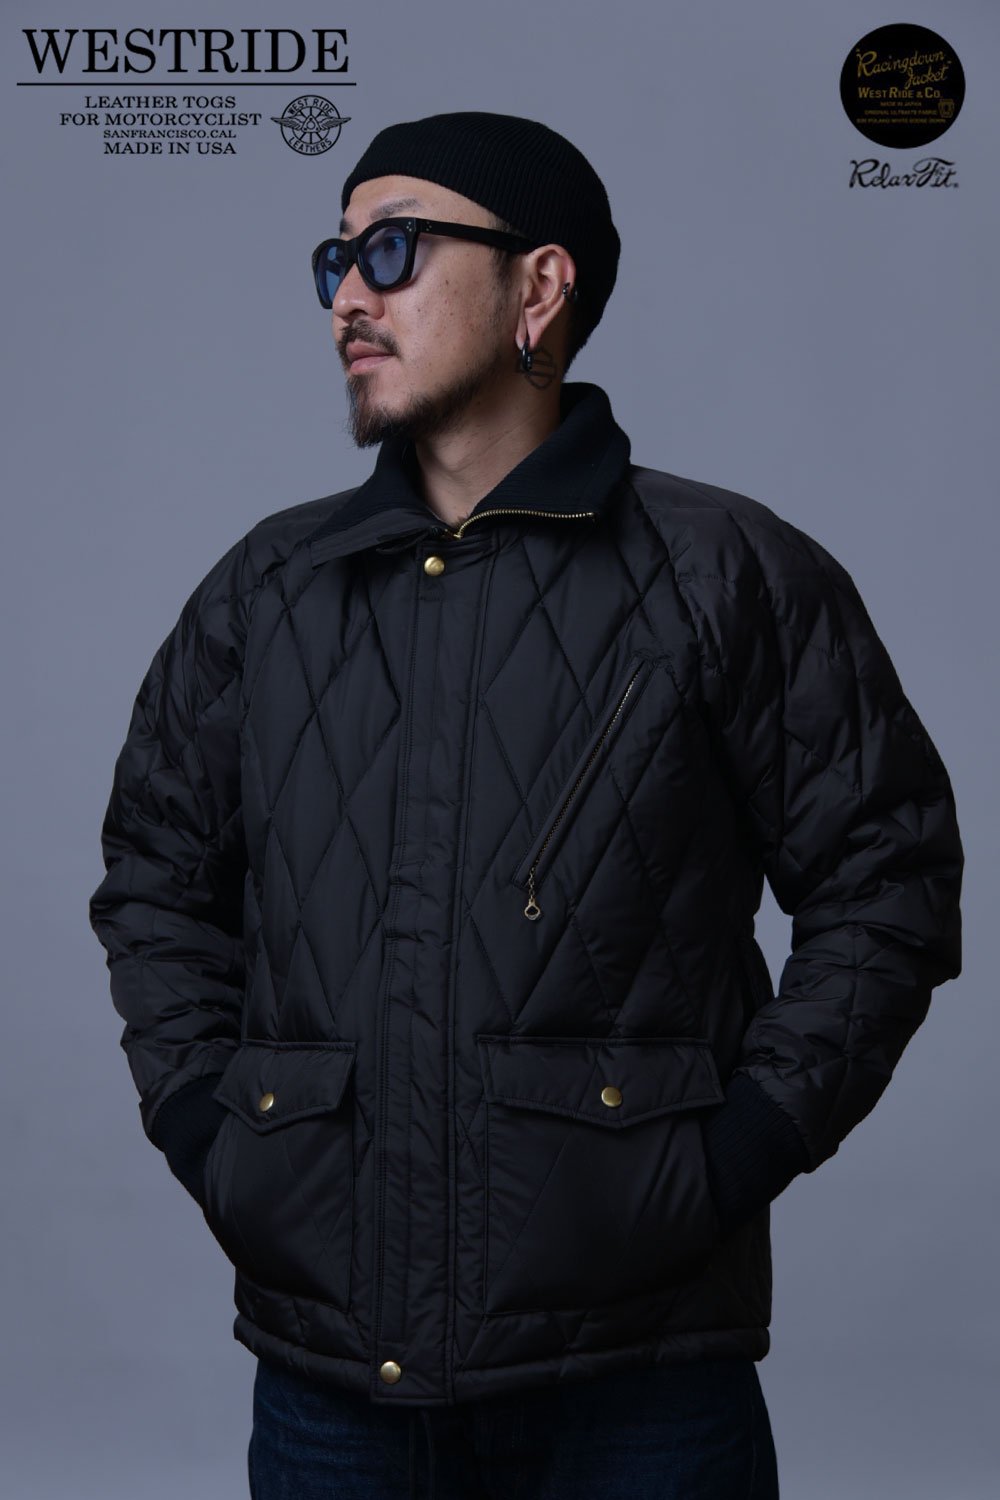 WESTRIDE(ウエストライド) レーシングダウンジャケット ALL NEW RACING DOWN JKT2 RELAX FIT/PLD  HJW-02RF 通販正規取扱 ハーレムストア公式通販サイト